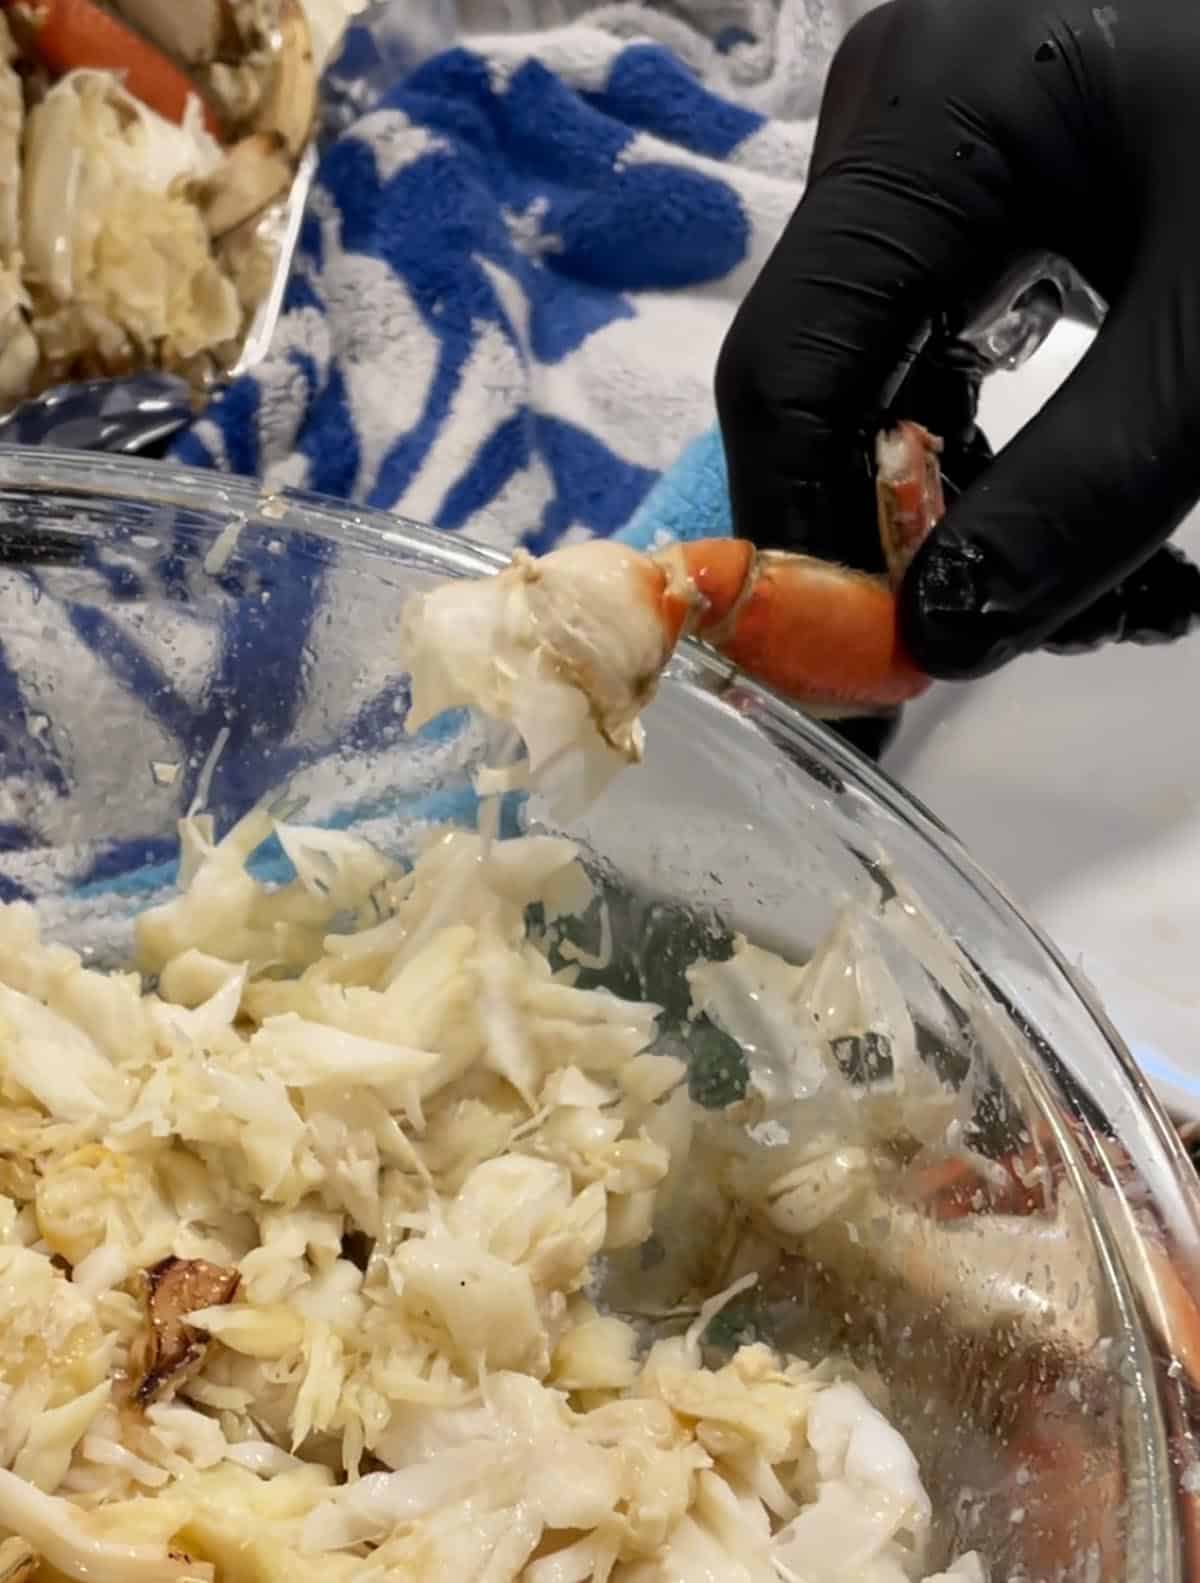 A crab leg being hit on the side of the bowl to remove the meat from the body.